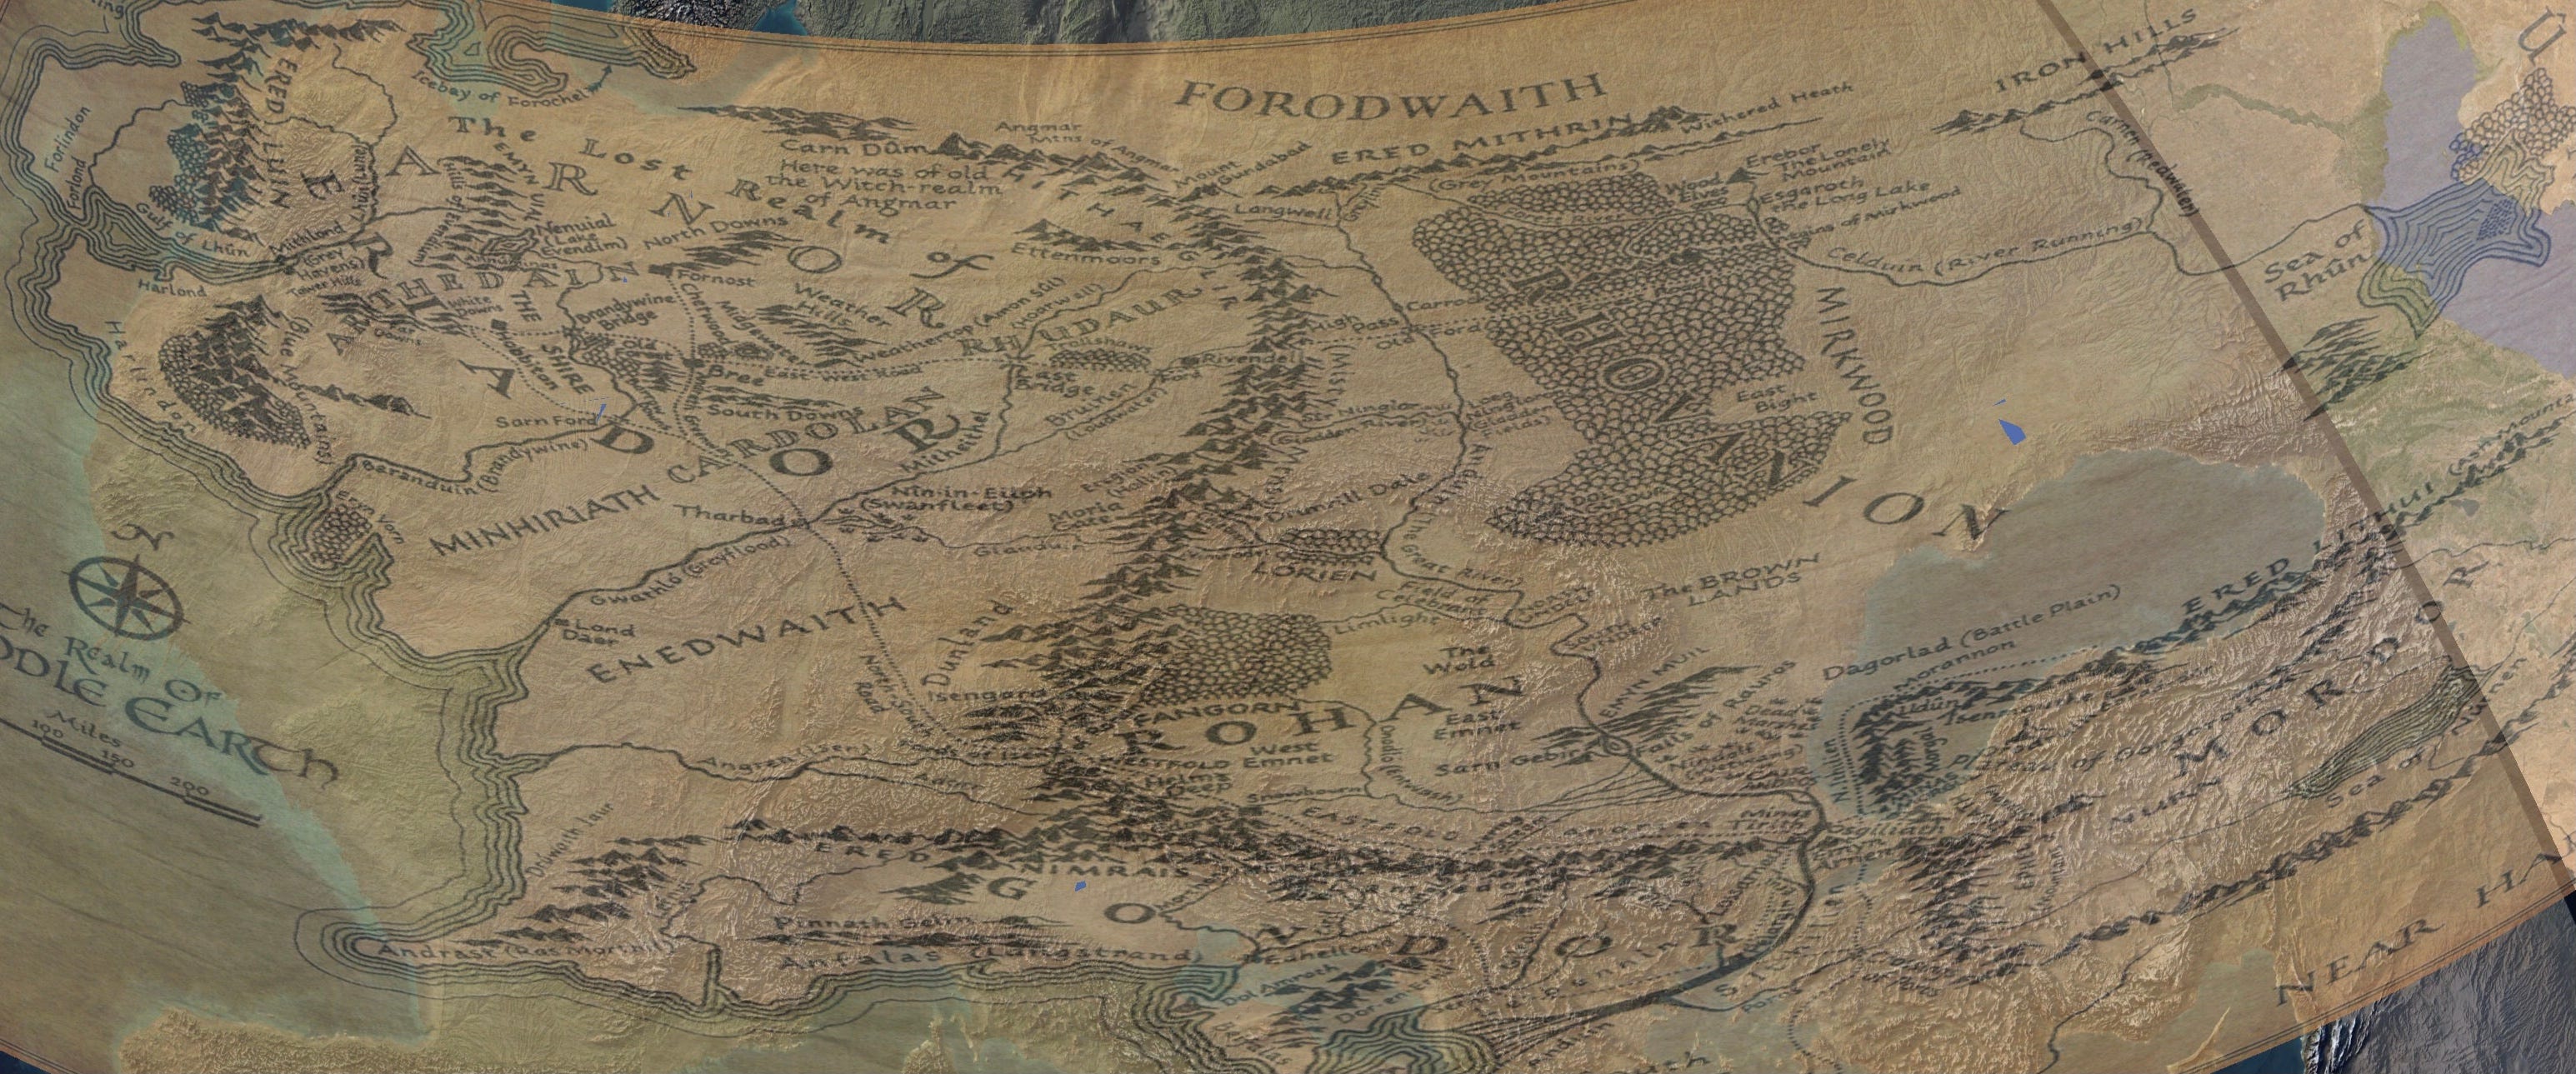 Tolkien's annotated map of Middle-earth discovered inside copy of